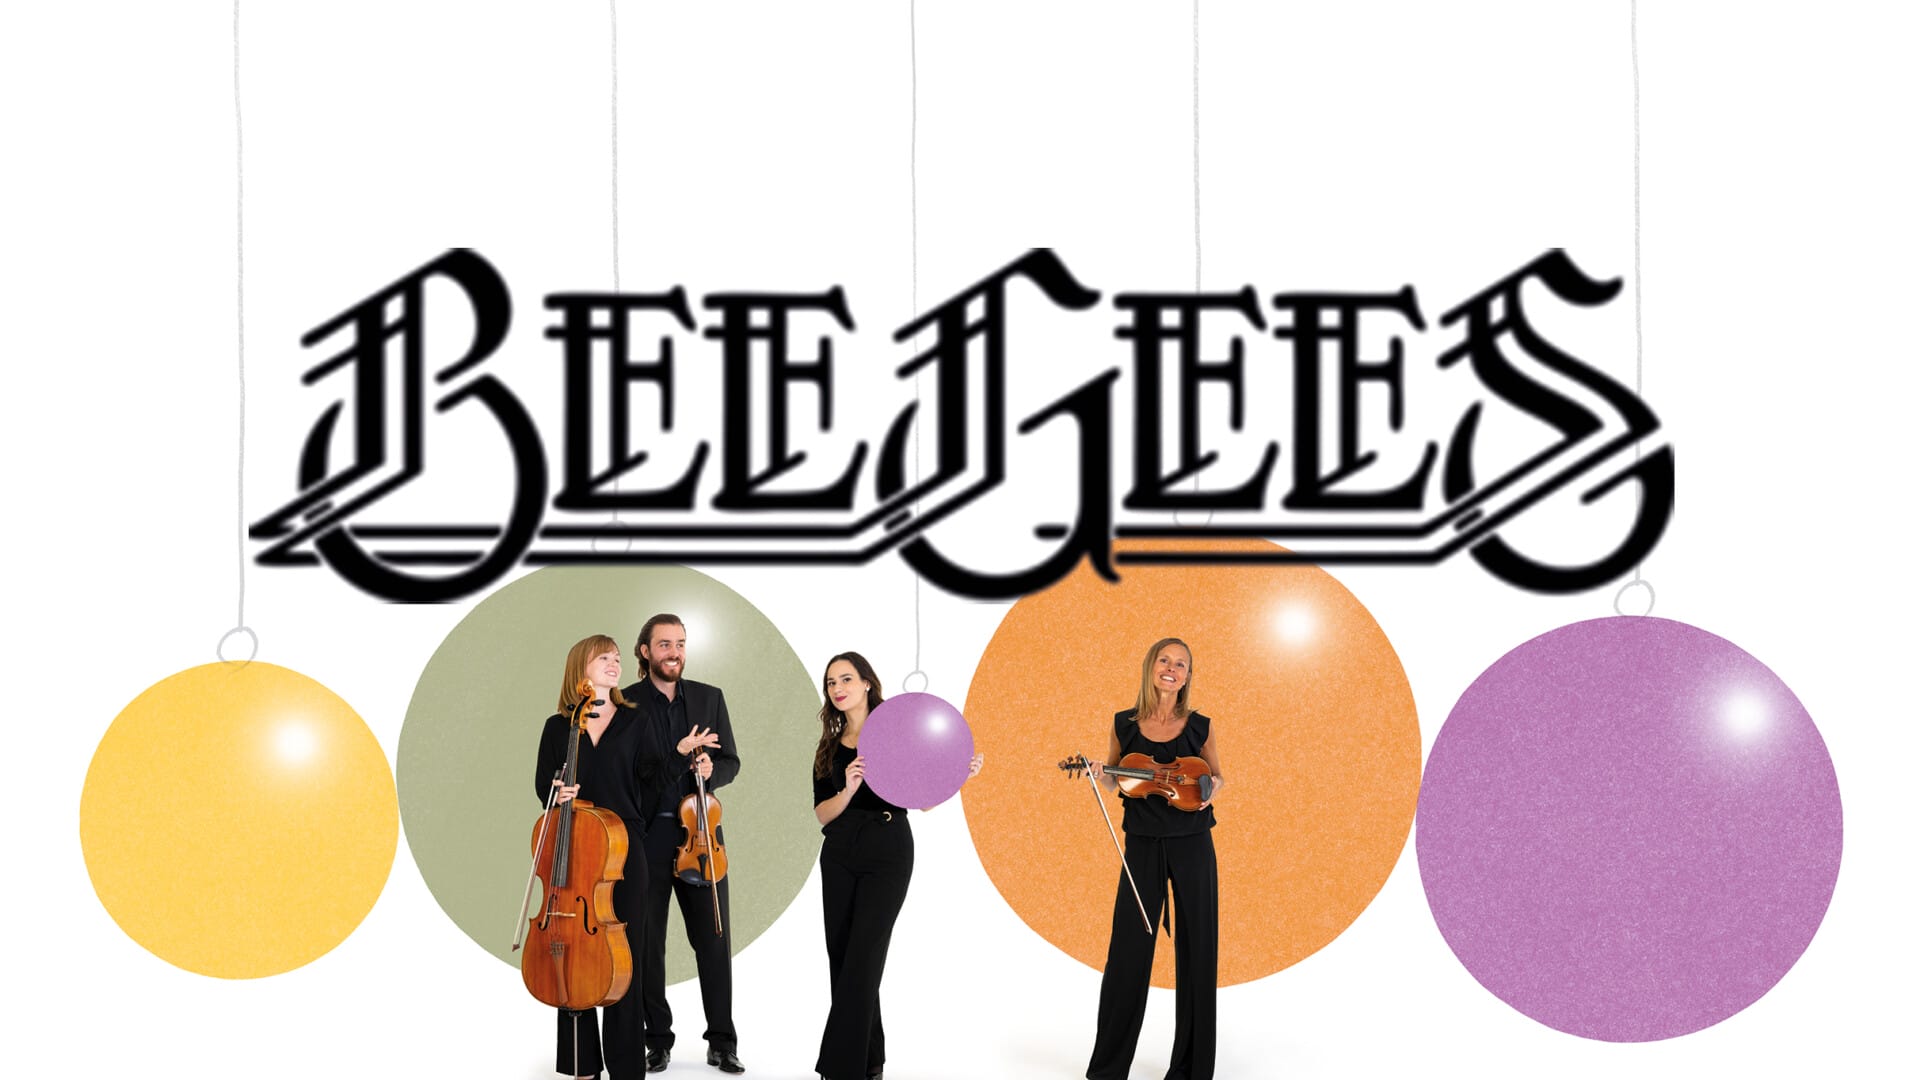 Image of BSO players with Bees Gees logo